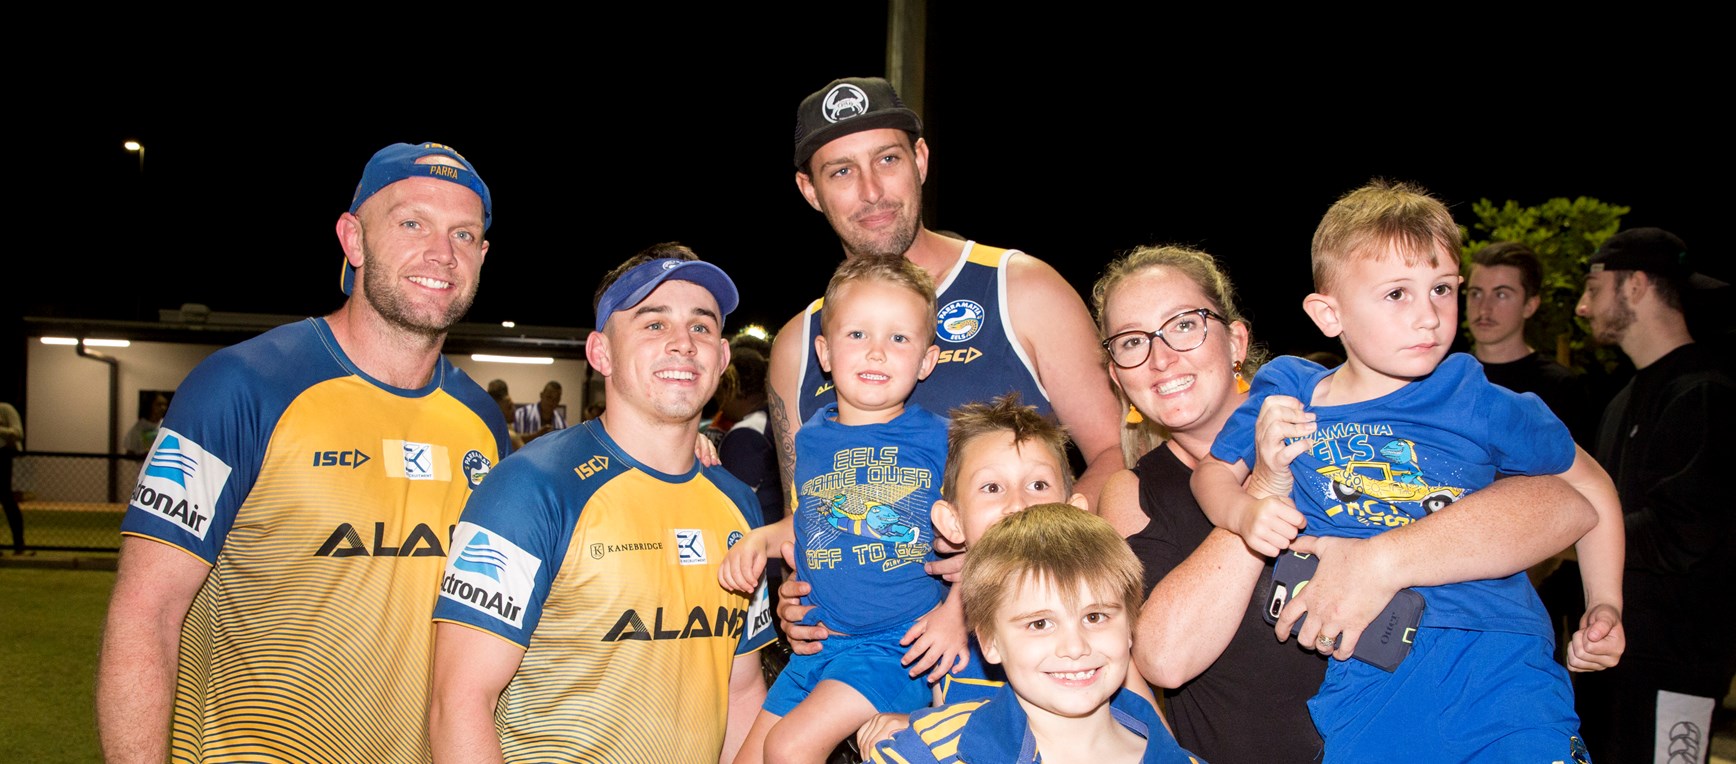 Eels Open Training Session - meet and greet